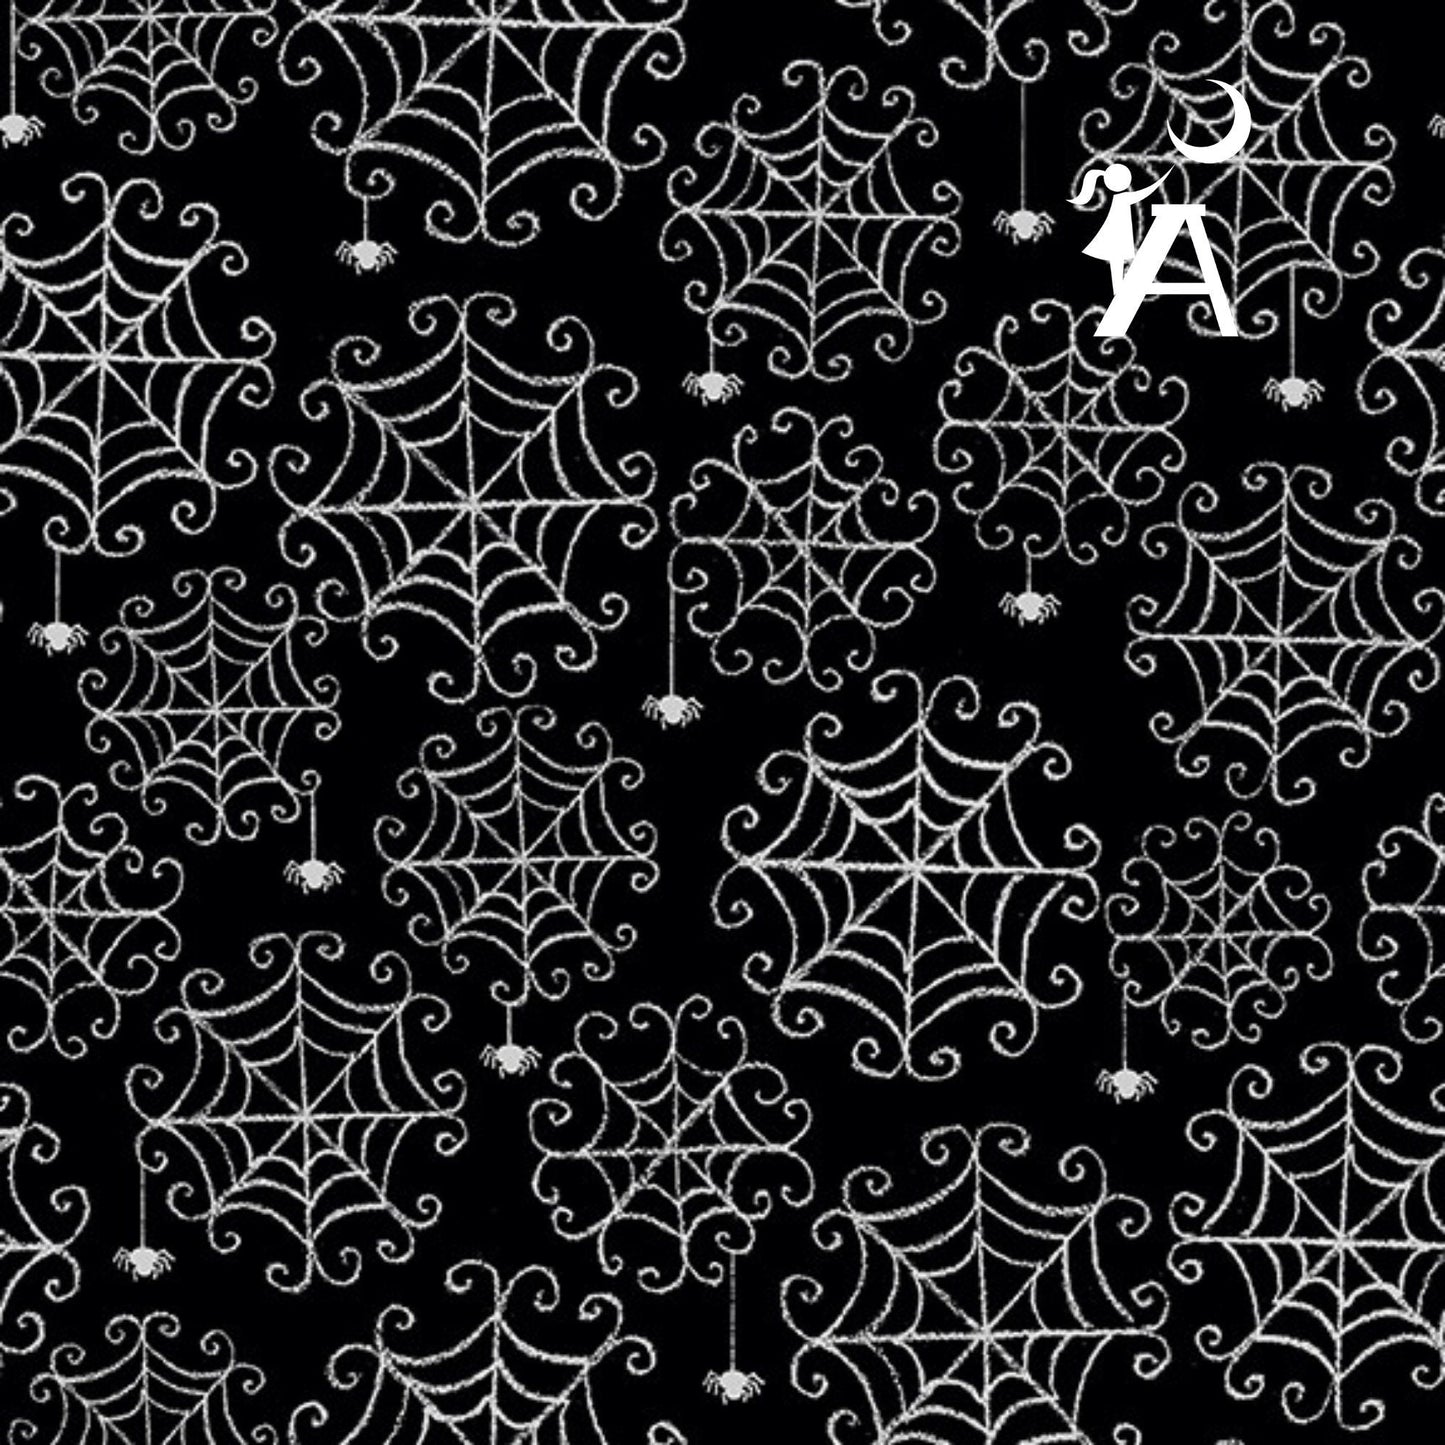 Henry Glass Fabric 1 yard 36"x44" / Spooky Town WEBS Riley Blake Haunted House C7134 Apothecary Bottle Fabric, OR Henry Glass Spooky Town Webs Spiderwebs - Black 9115M-99